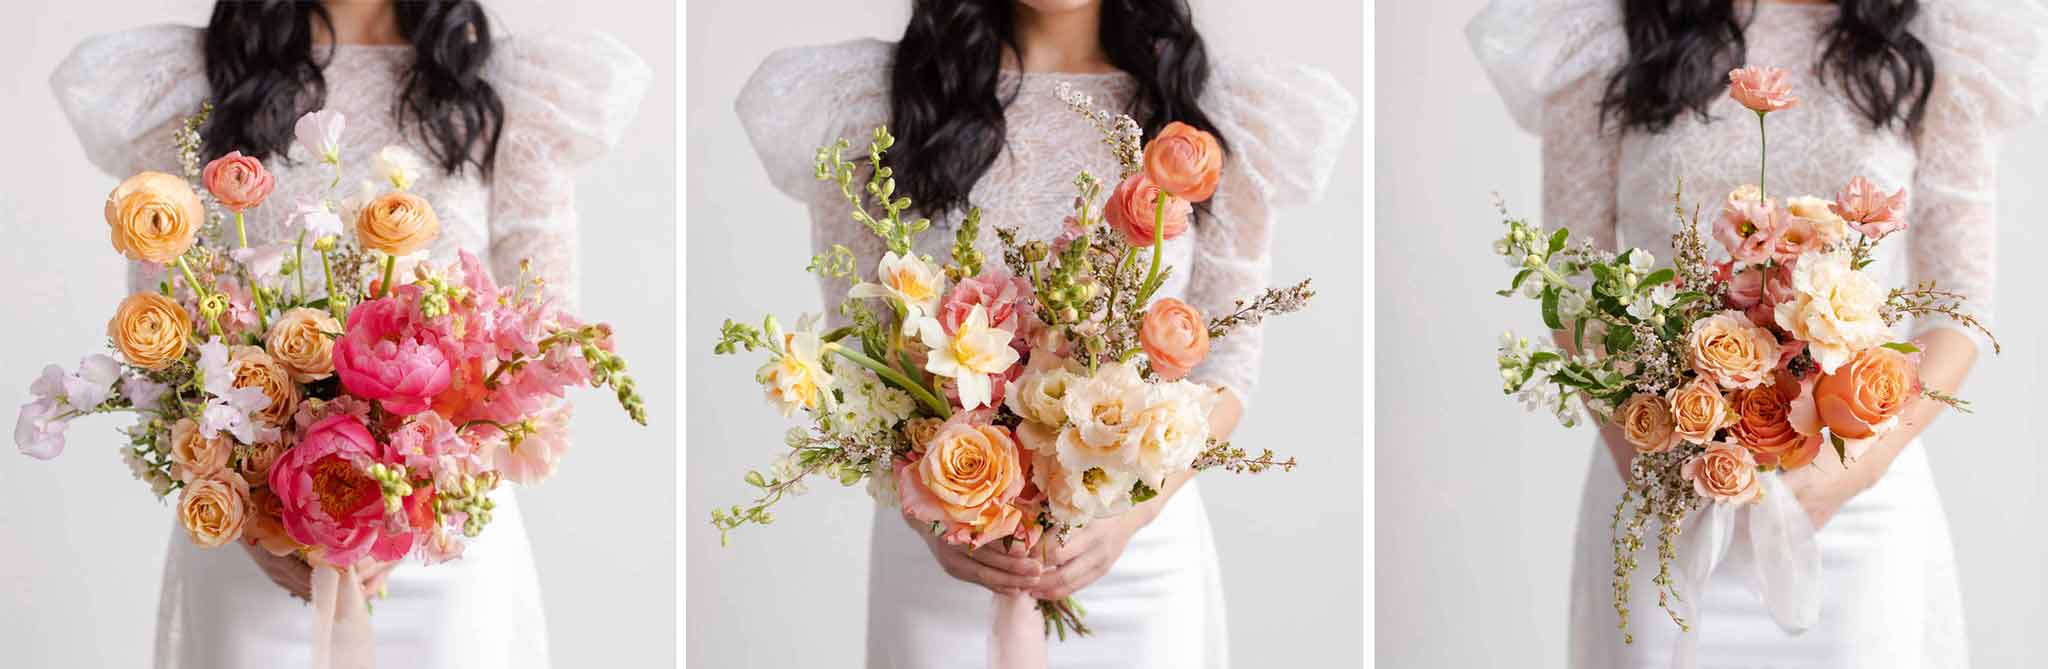 Woman in a white dress holding three sizes of wedding bouquet